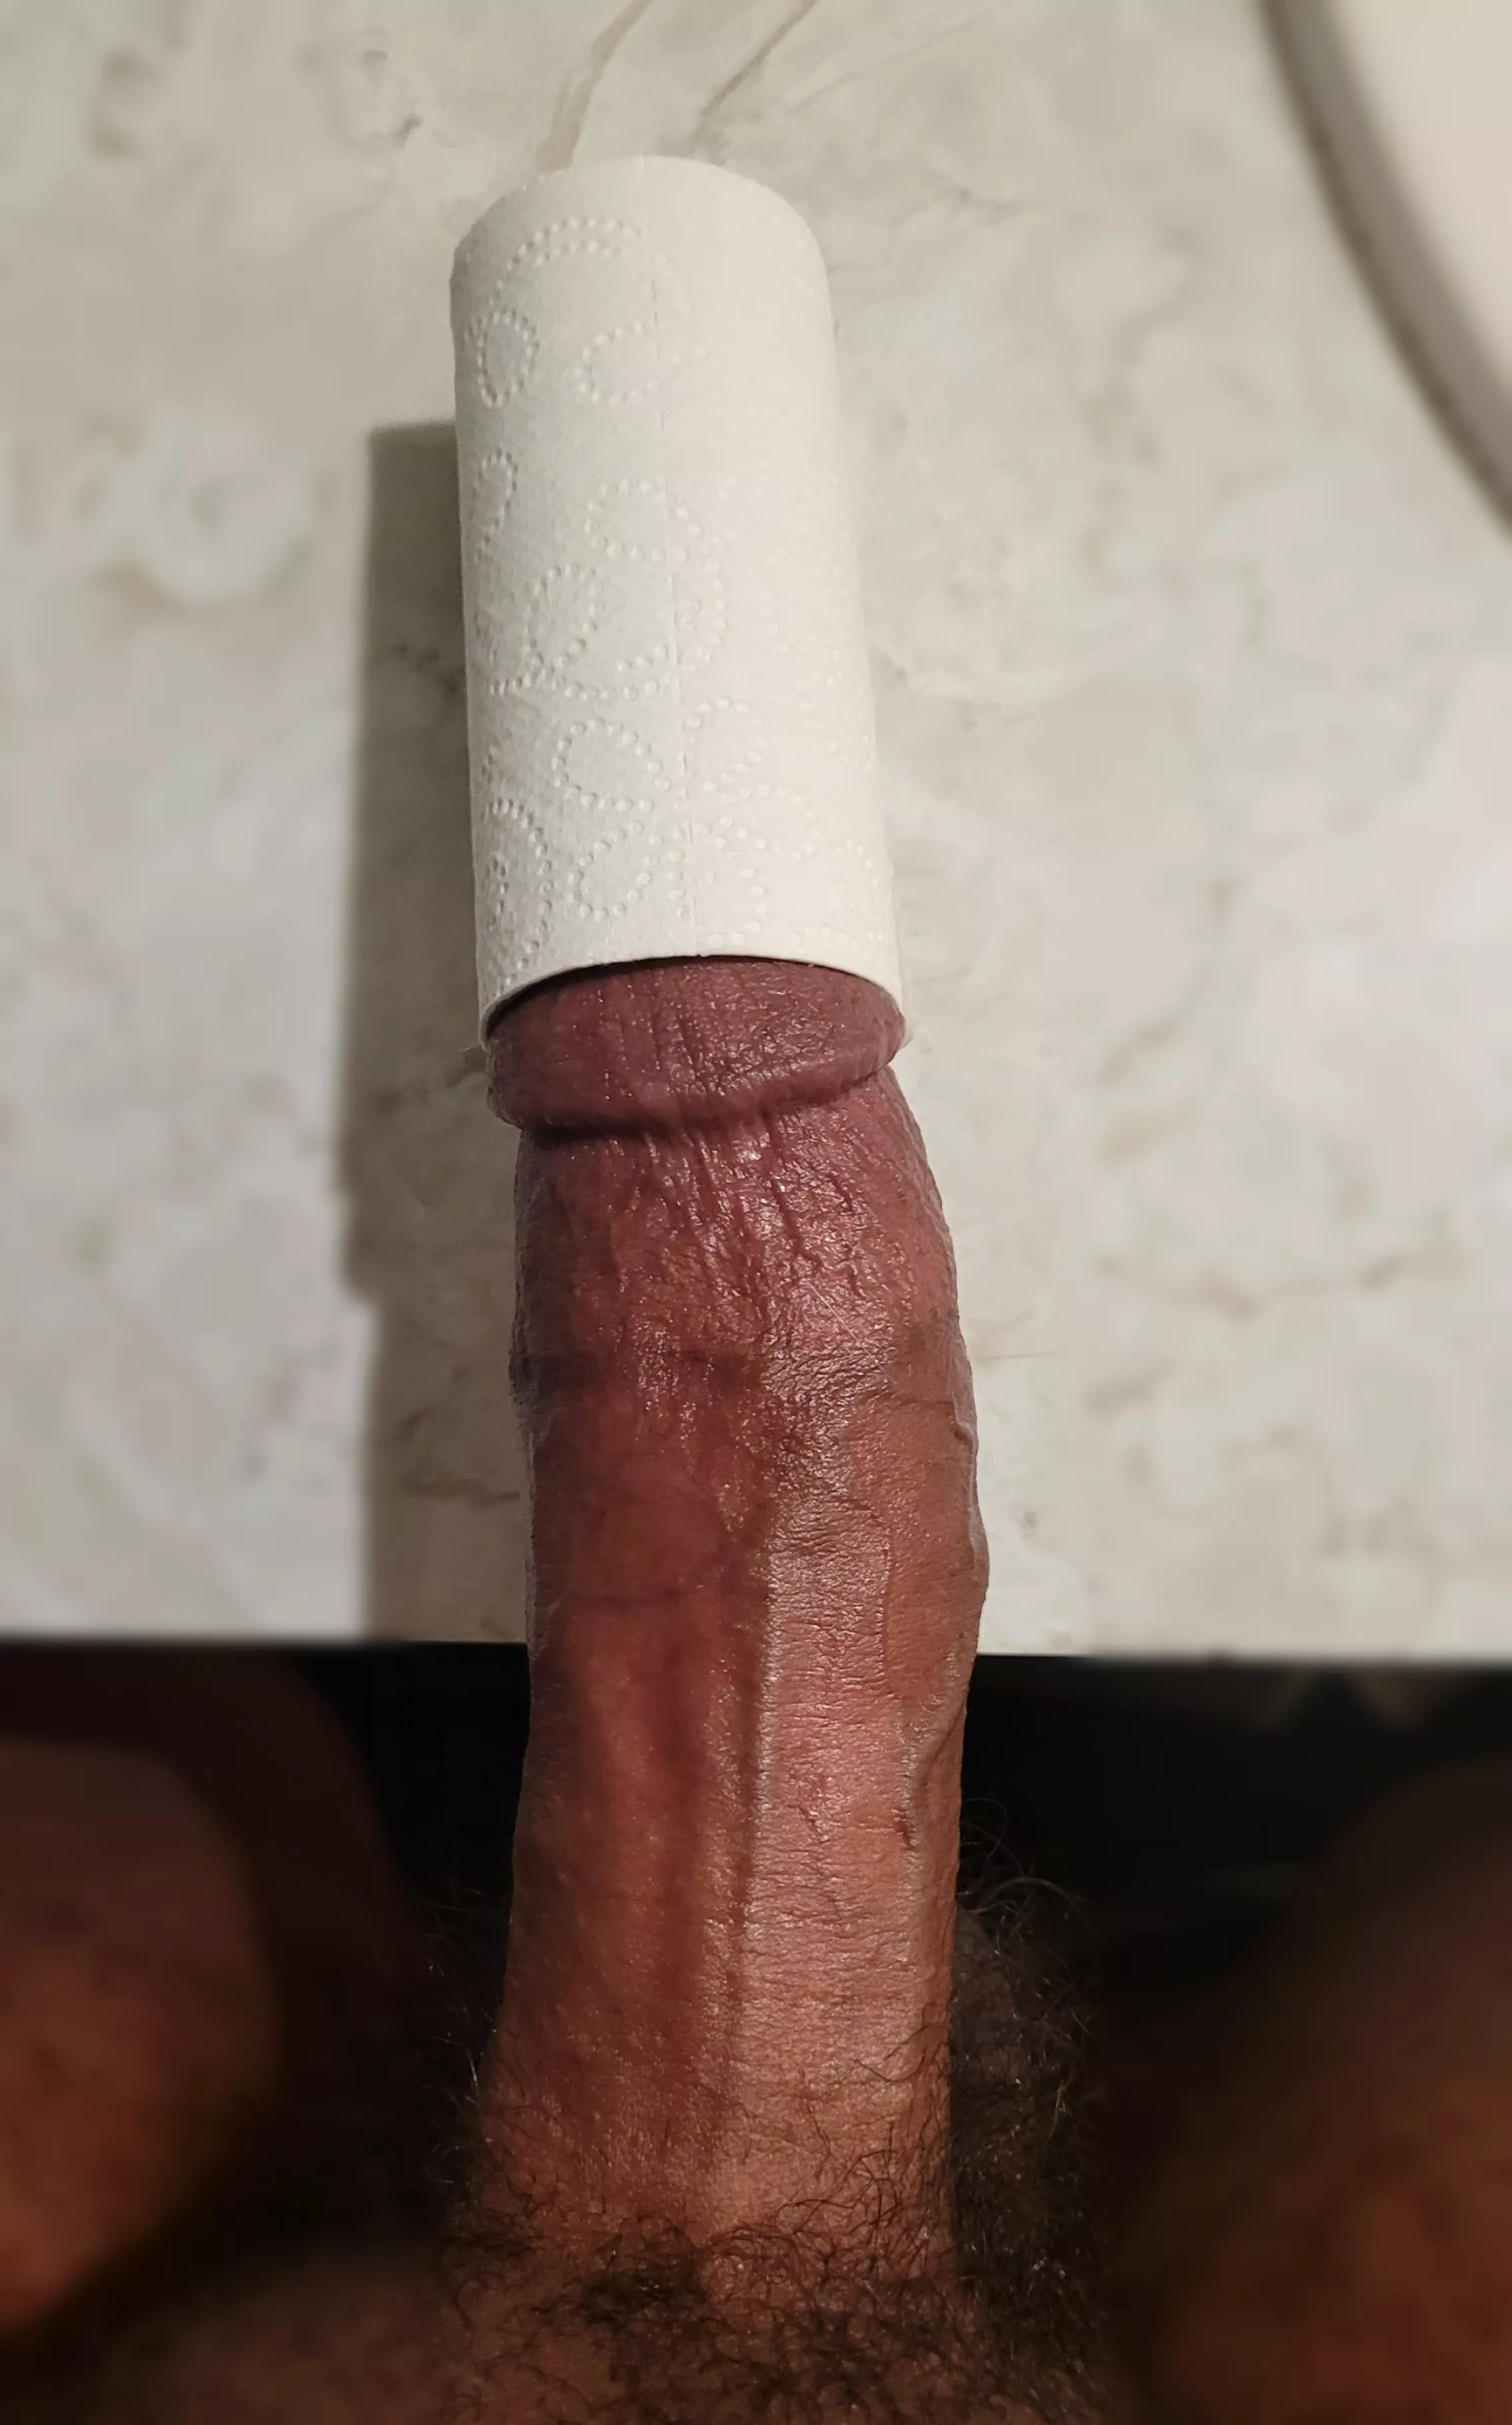 Dicks That Dont Fit